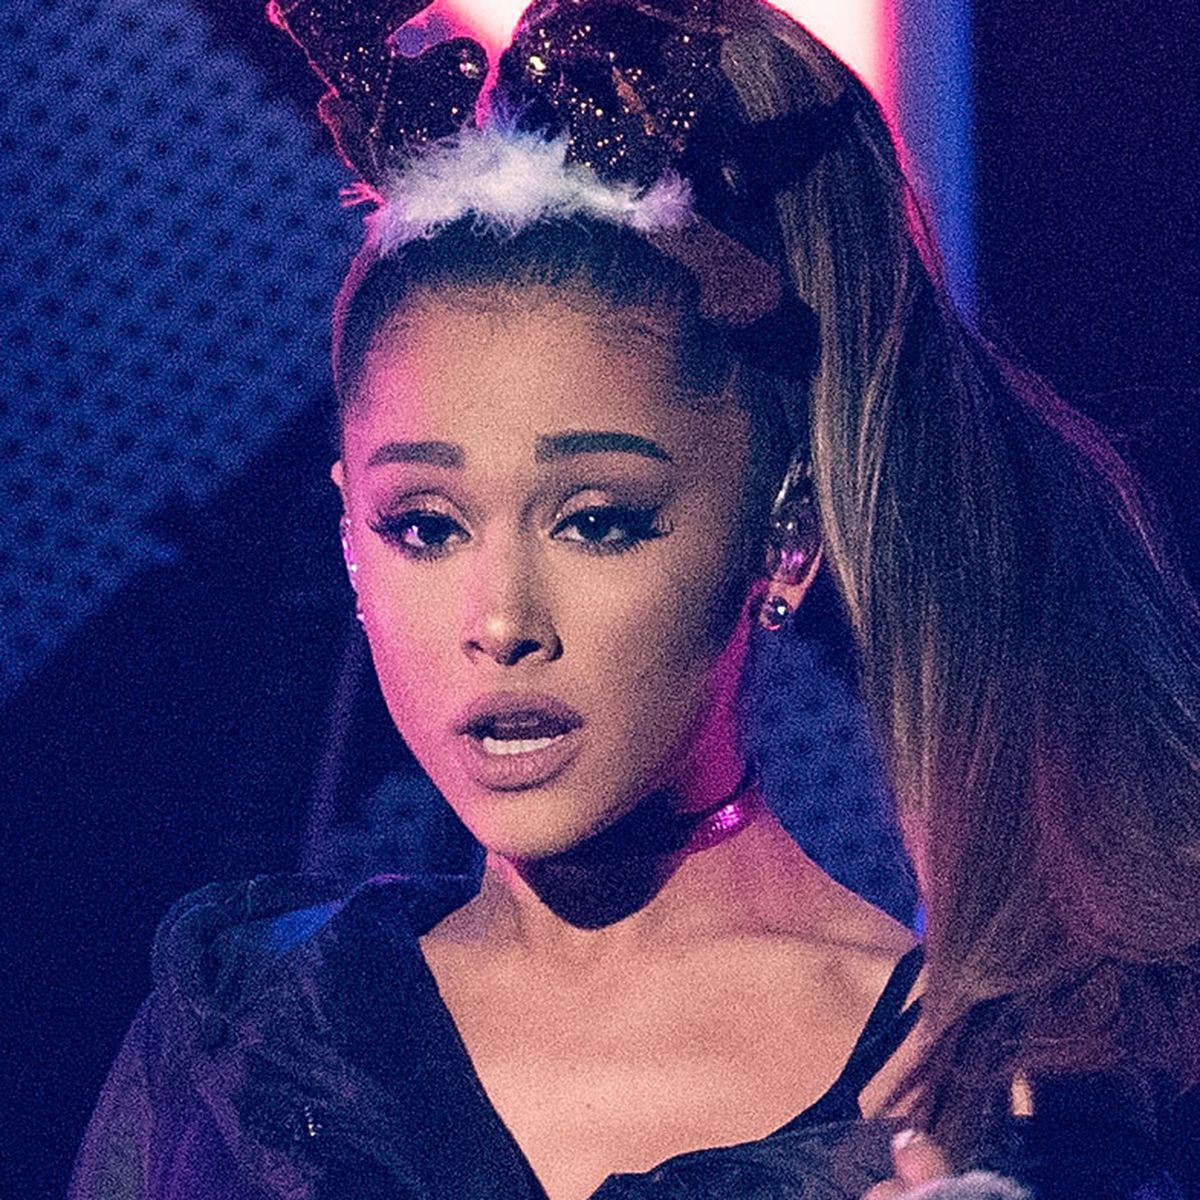 Ariana Grande Xxx - Ariana Grande scolds and schools male fan after XXX comment: 'I am not a  piece of meat' - 9Celebrity